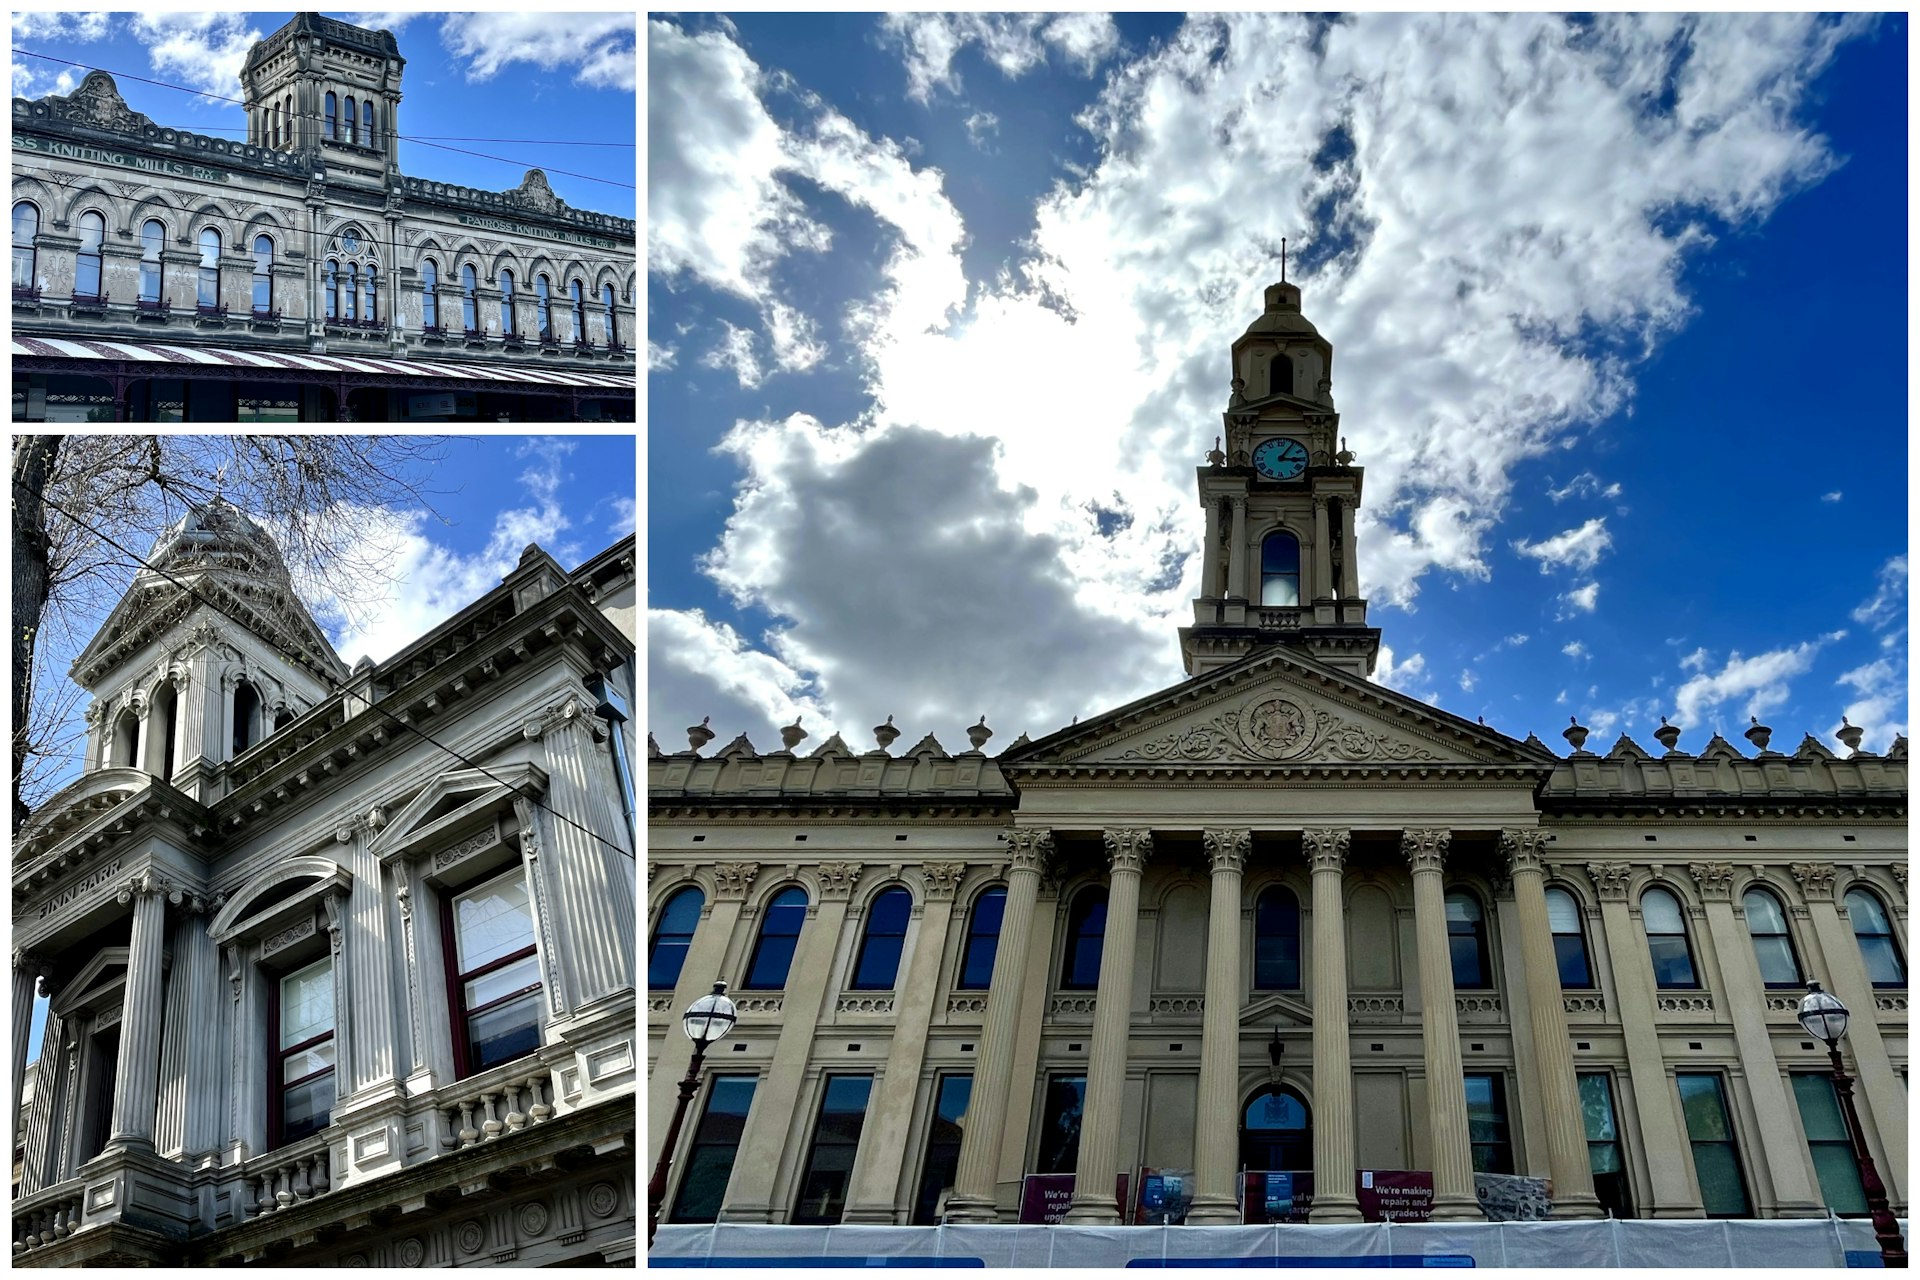 Exterior shots of Melbourne Town Hall and the Patross Knitting Mills Building